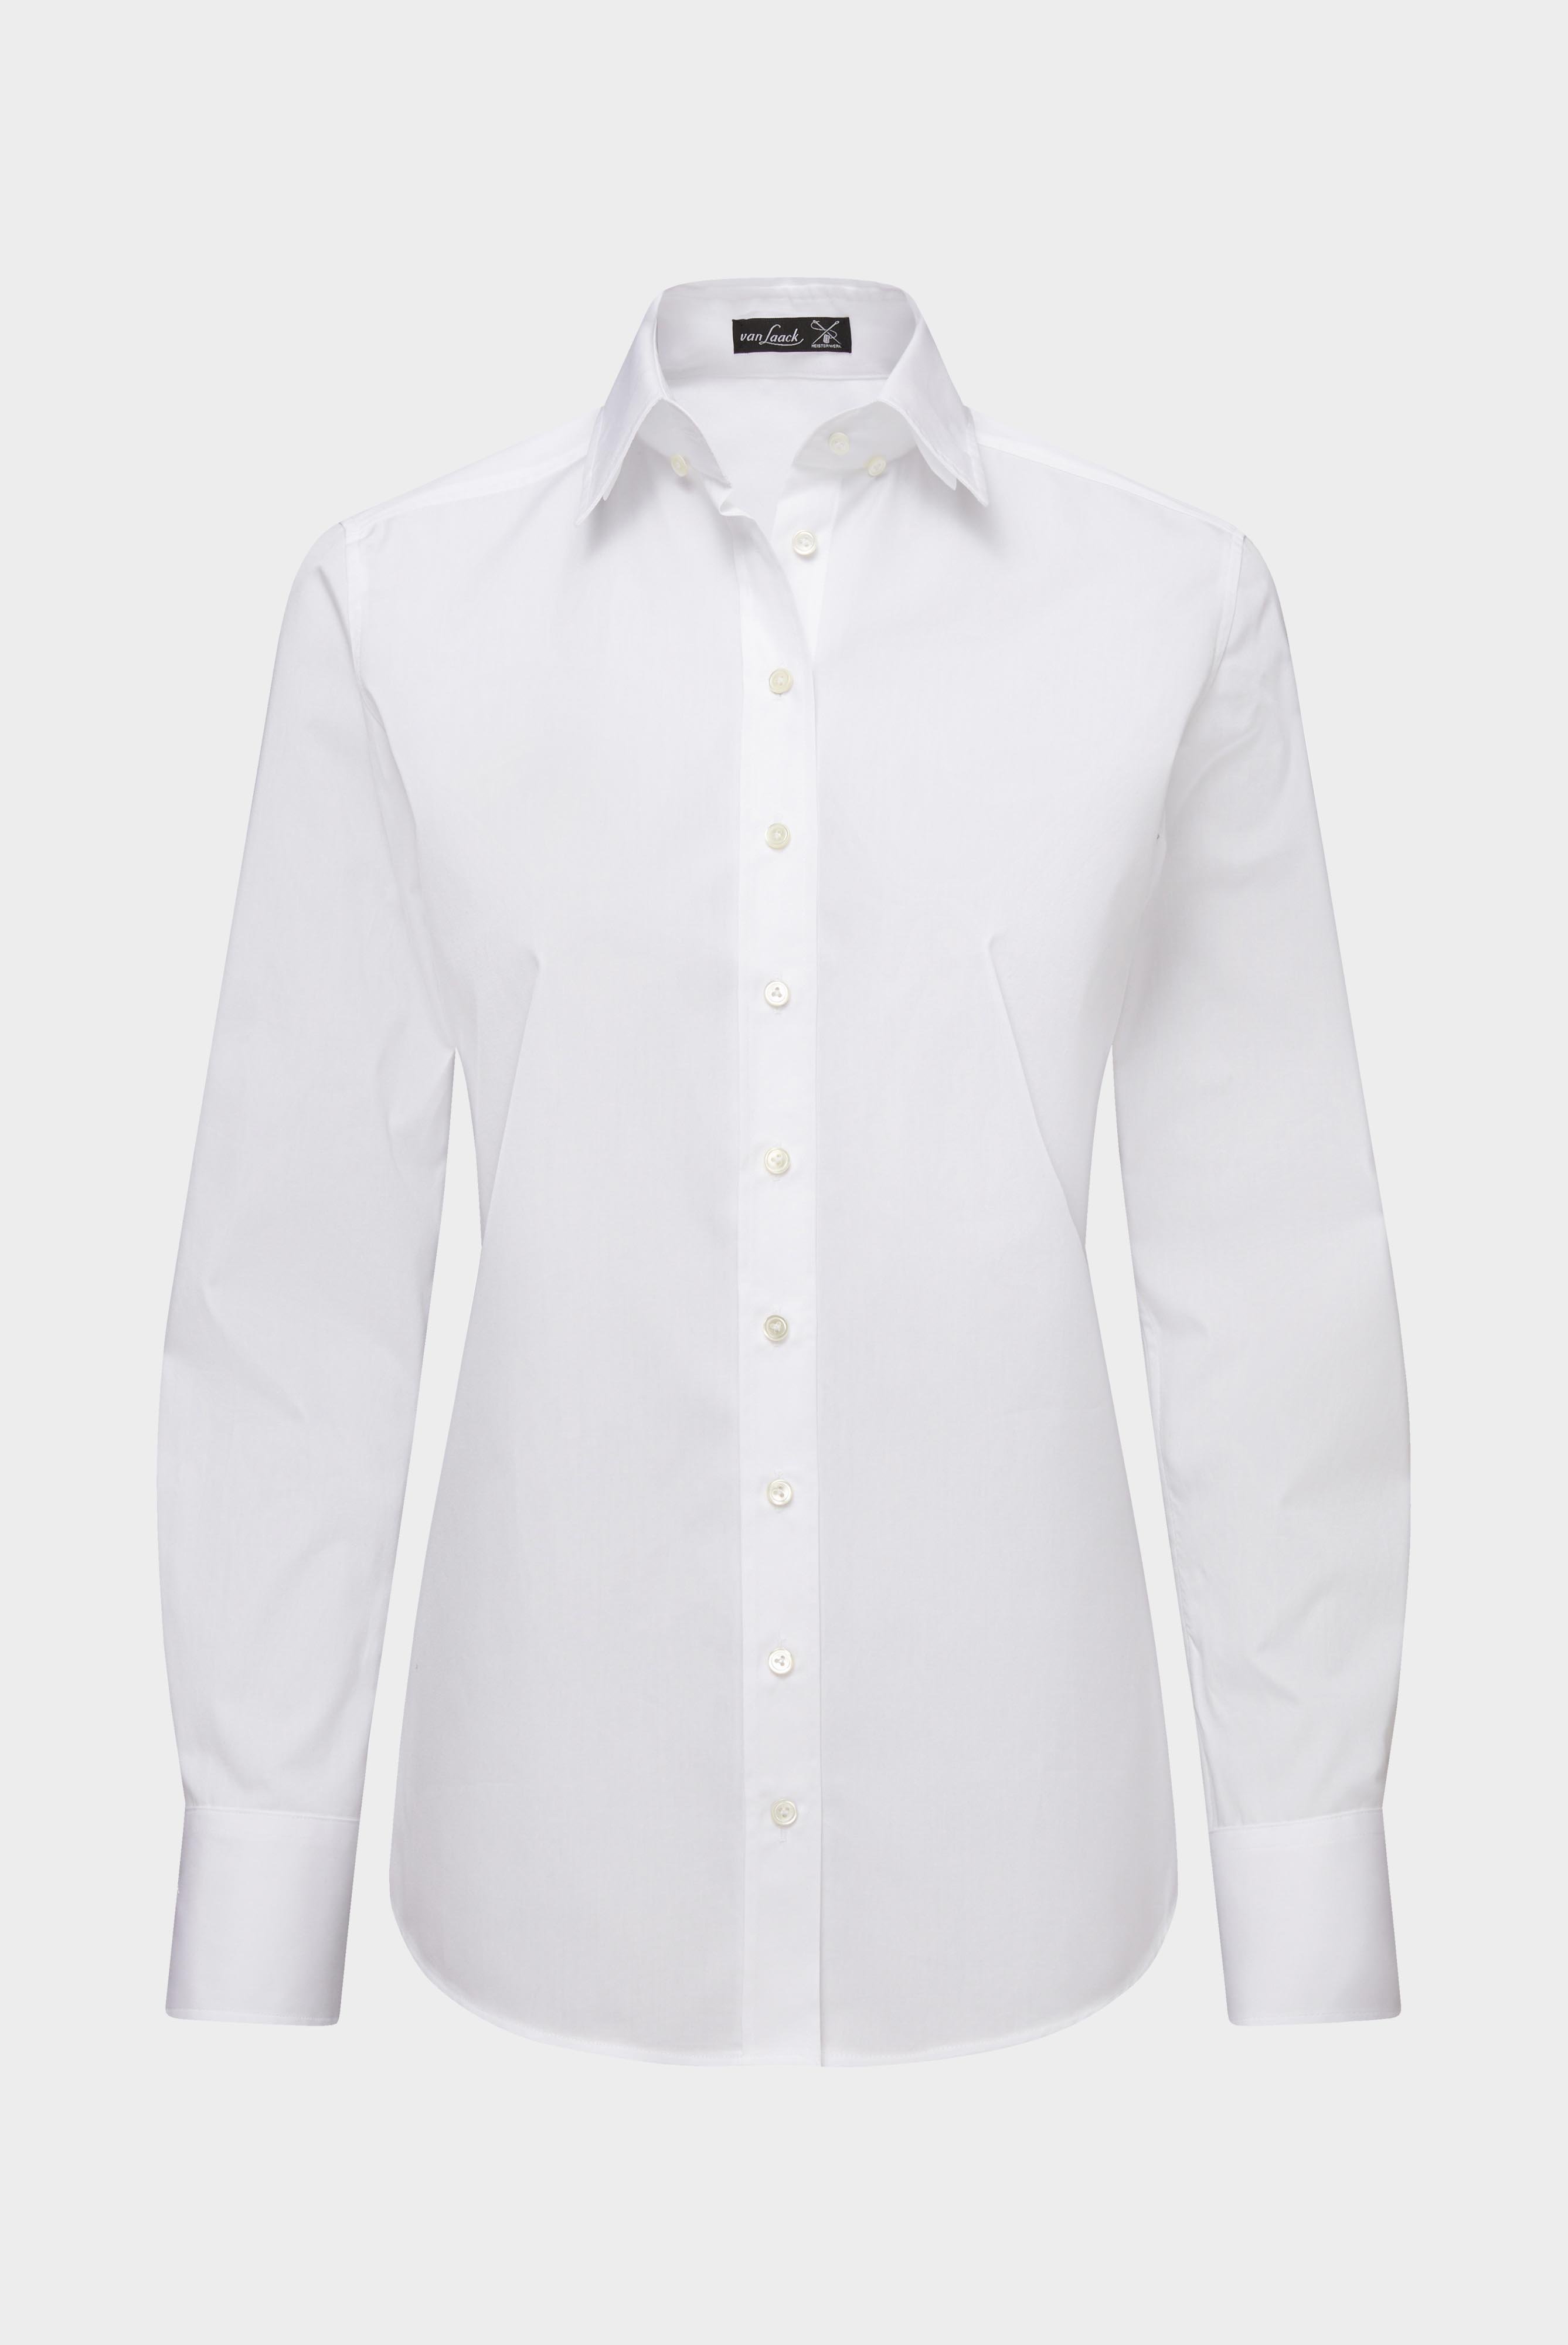 Business Blouses+Poplin Shirt Blouse with Button Down Collar+05.516T.73.130648.000.38